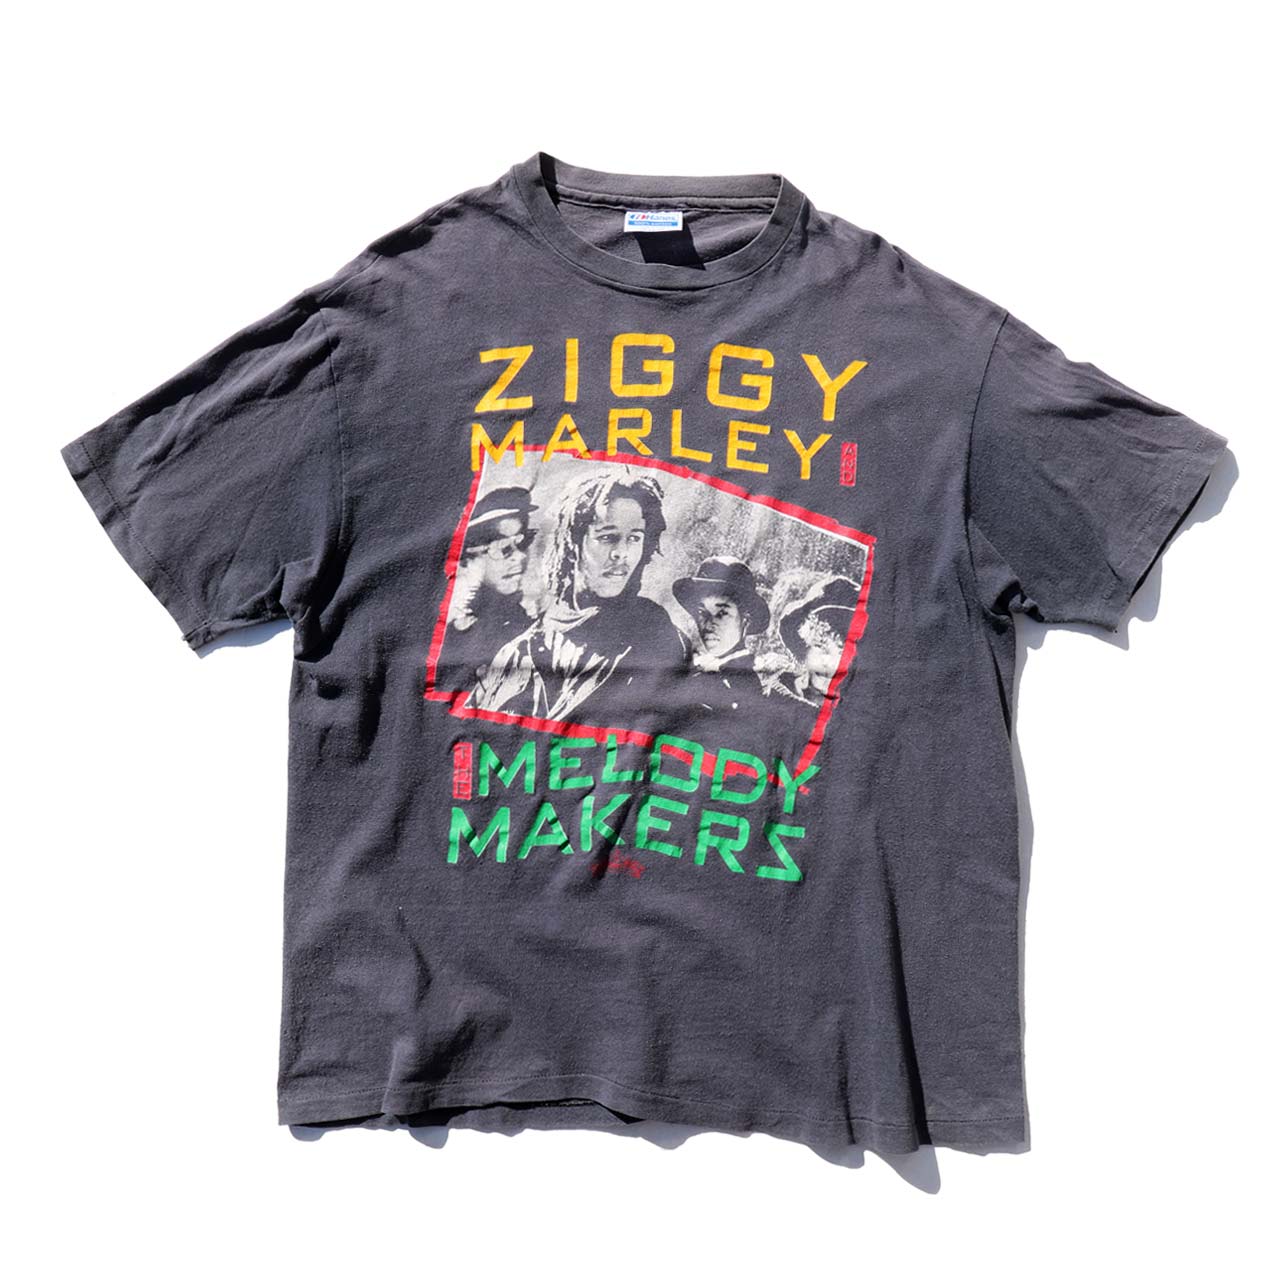 POST JUNK / 80's ZIGGY MARLEY AND THE MELODY MAKERS T-Shirt Made